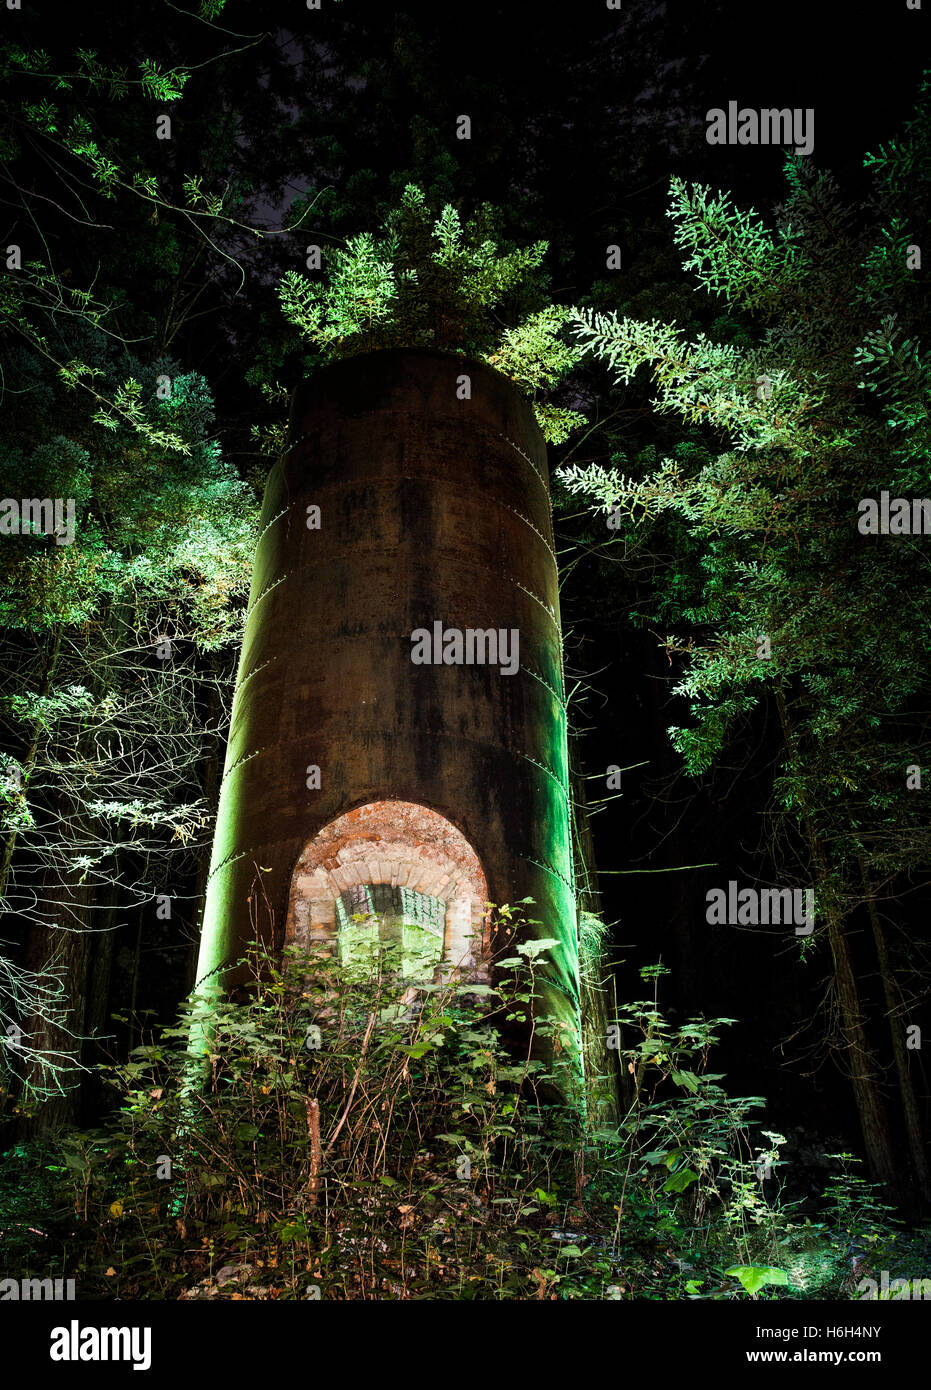 One of the limekilns lit by green lights in Limekiln State Park, Big Sur, California. Stock Photo